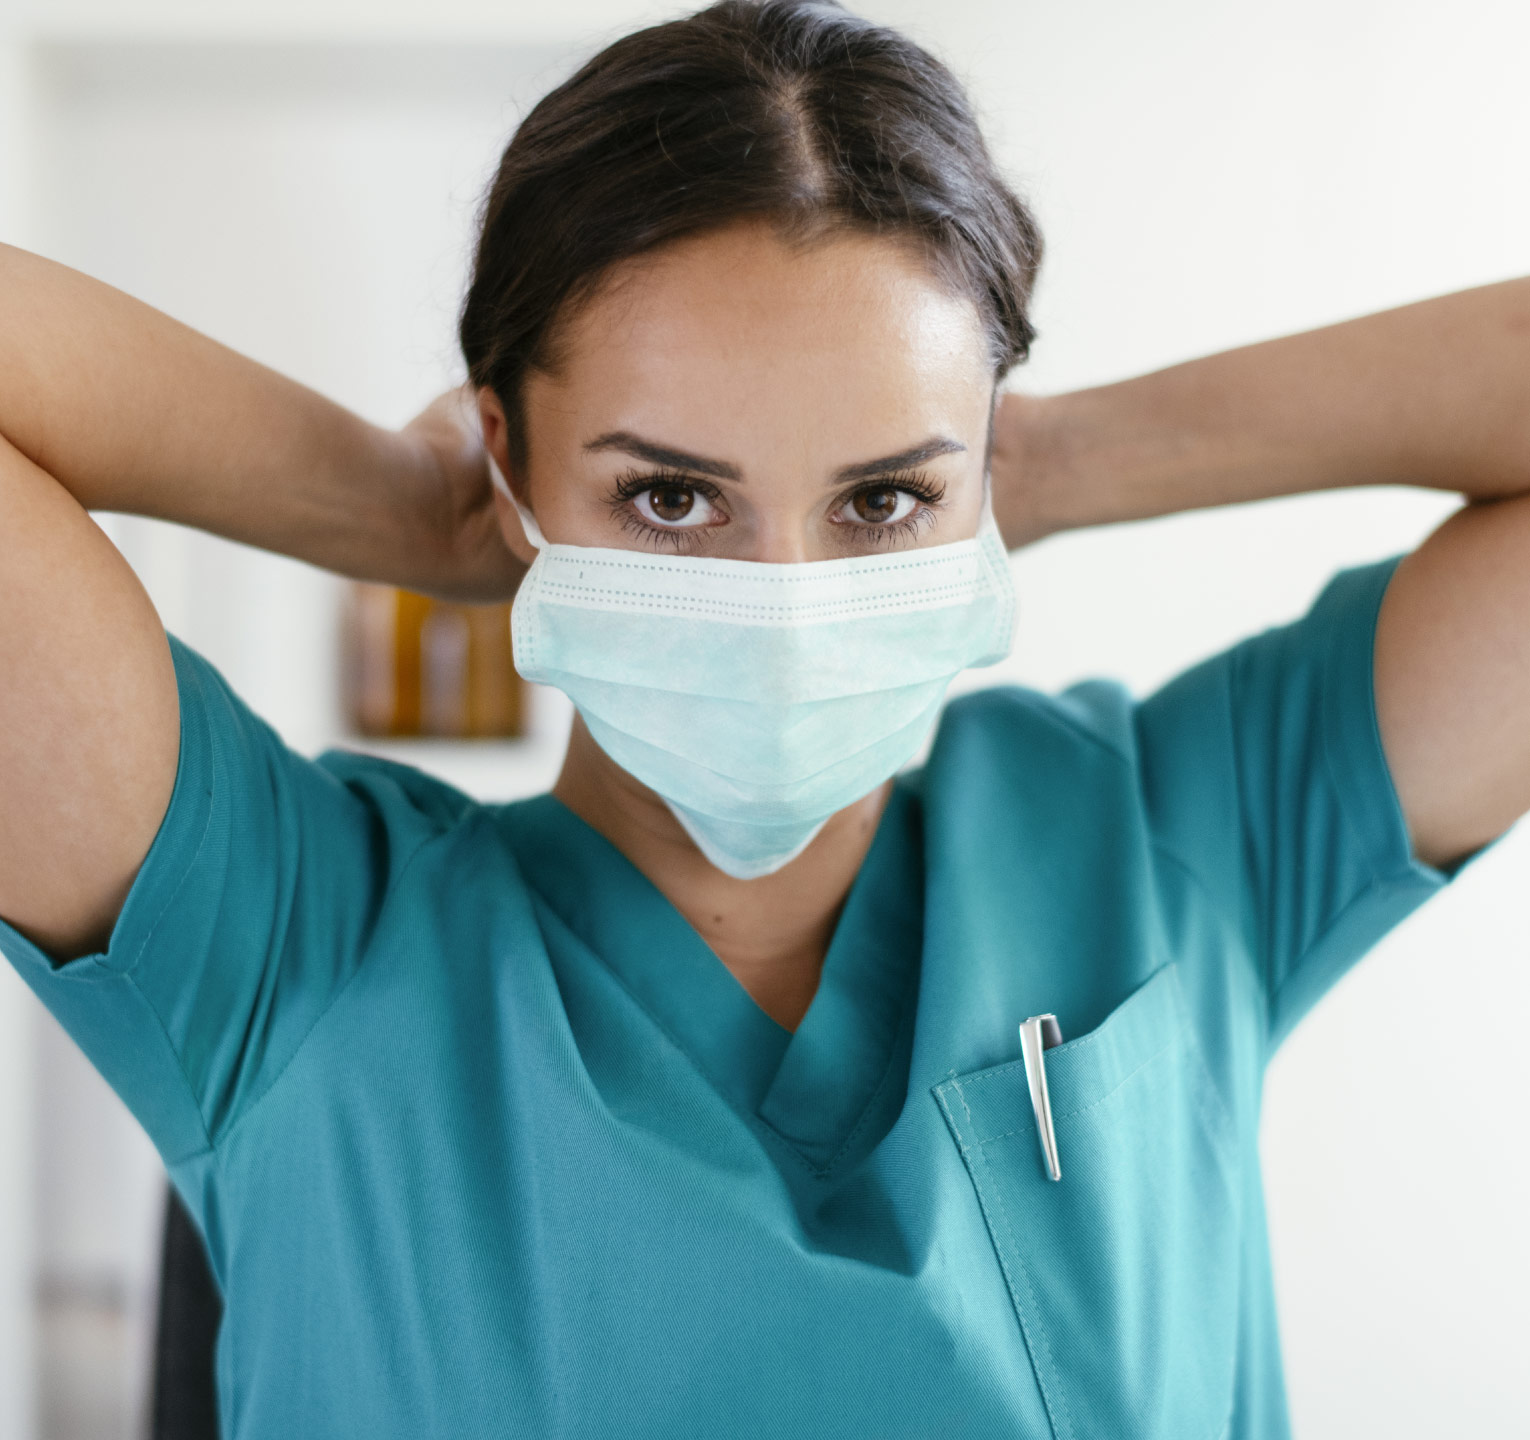 3 soft skills that helped me become a better nurse leader during the COVID-19 pandemic